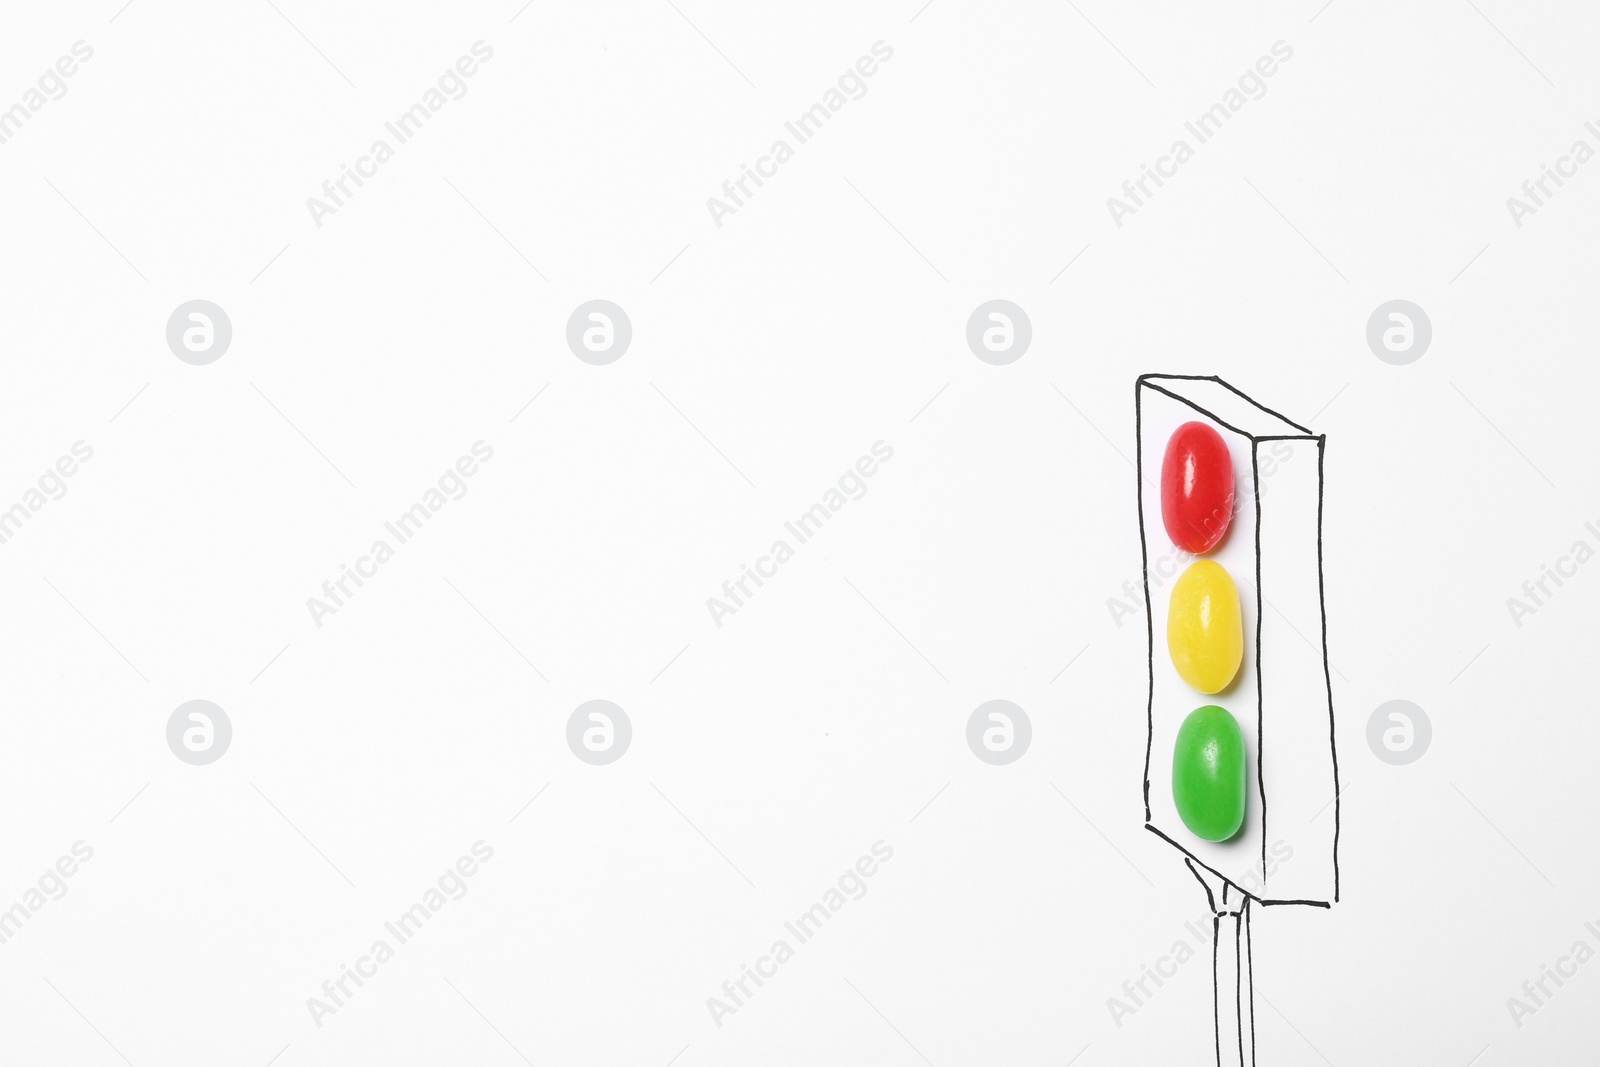 Photo of Colorful jelly candies arranged as traffic light on white background, top view